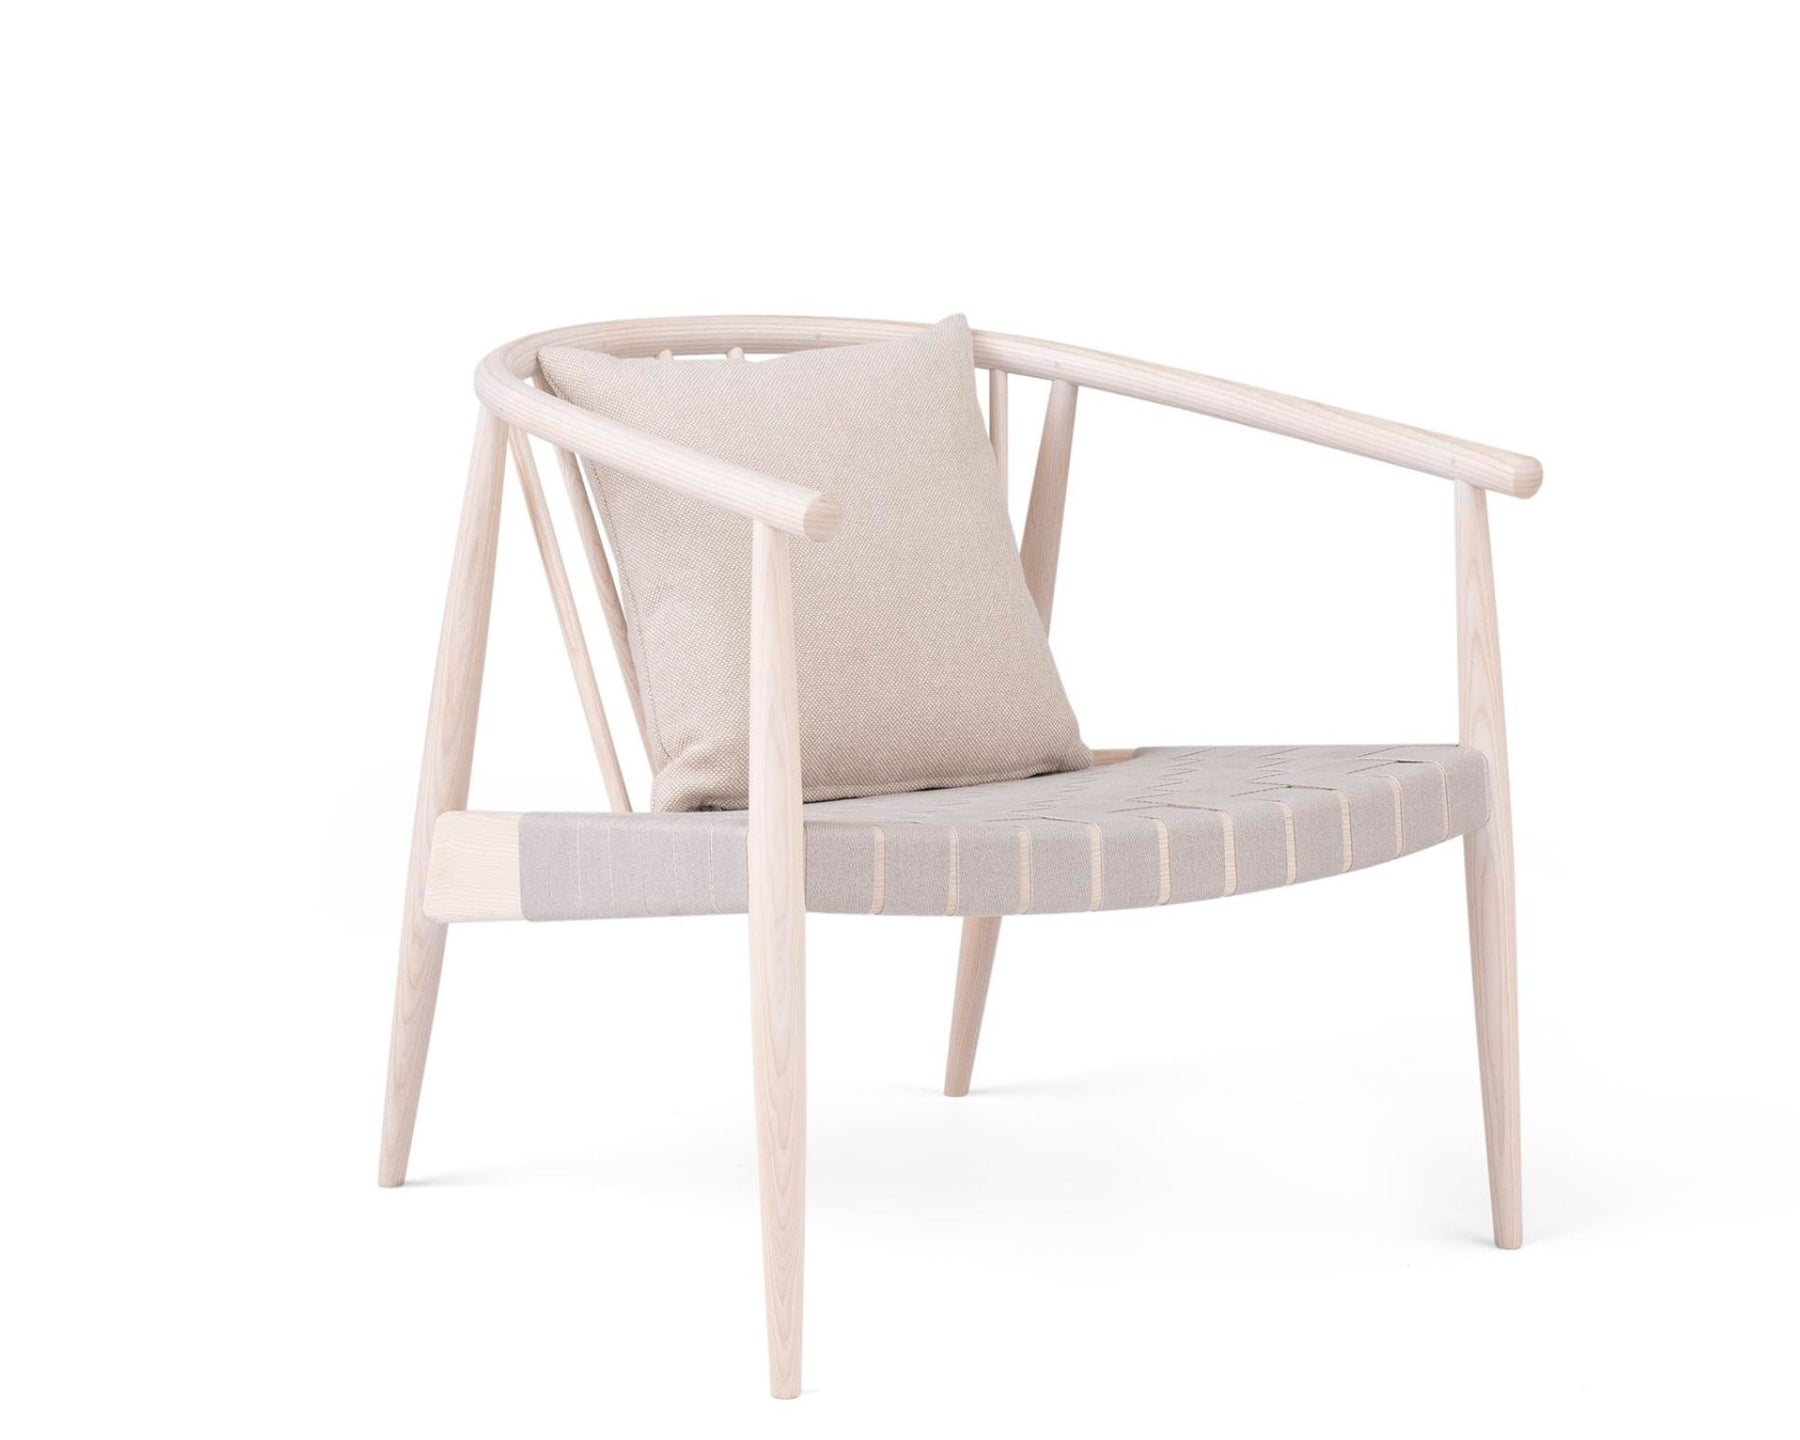 Ash Reprise Chair with Webbed Seat | DSHOP